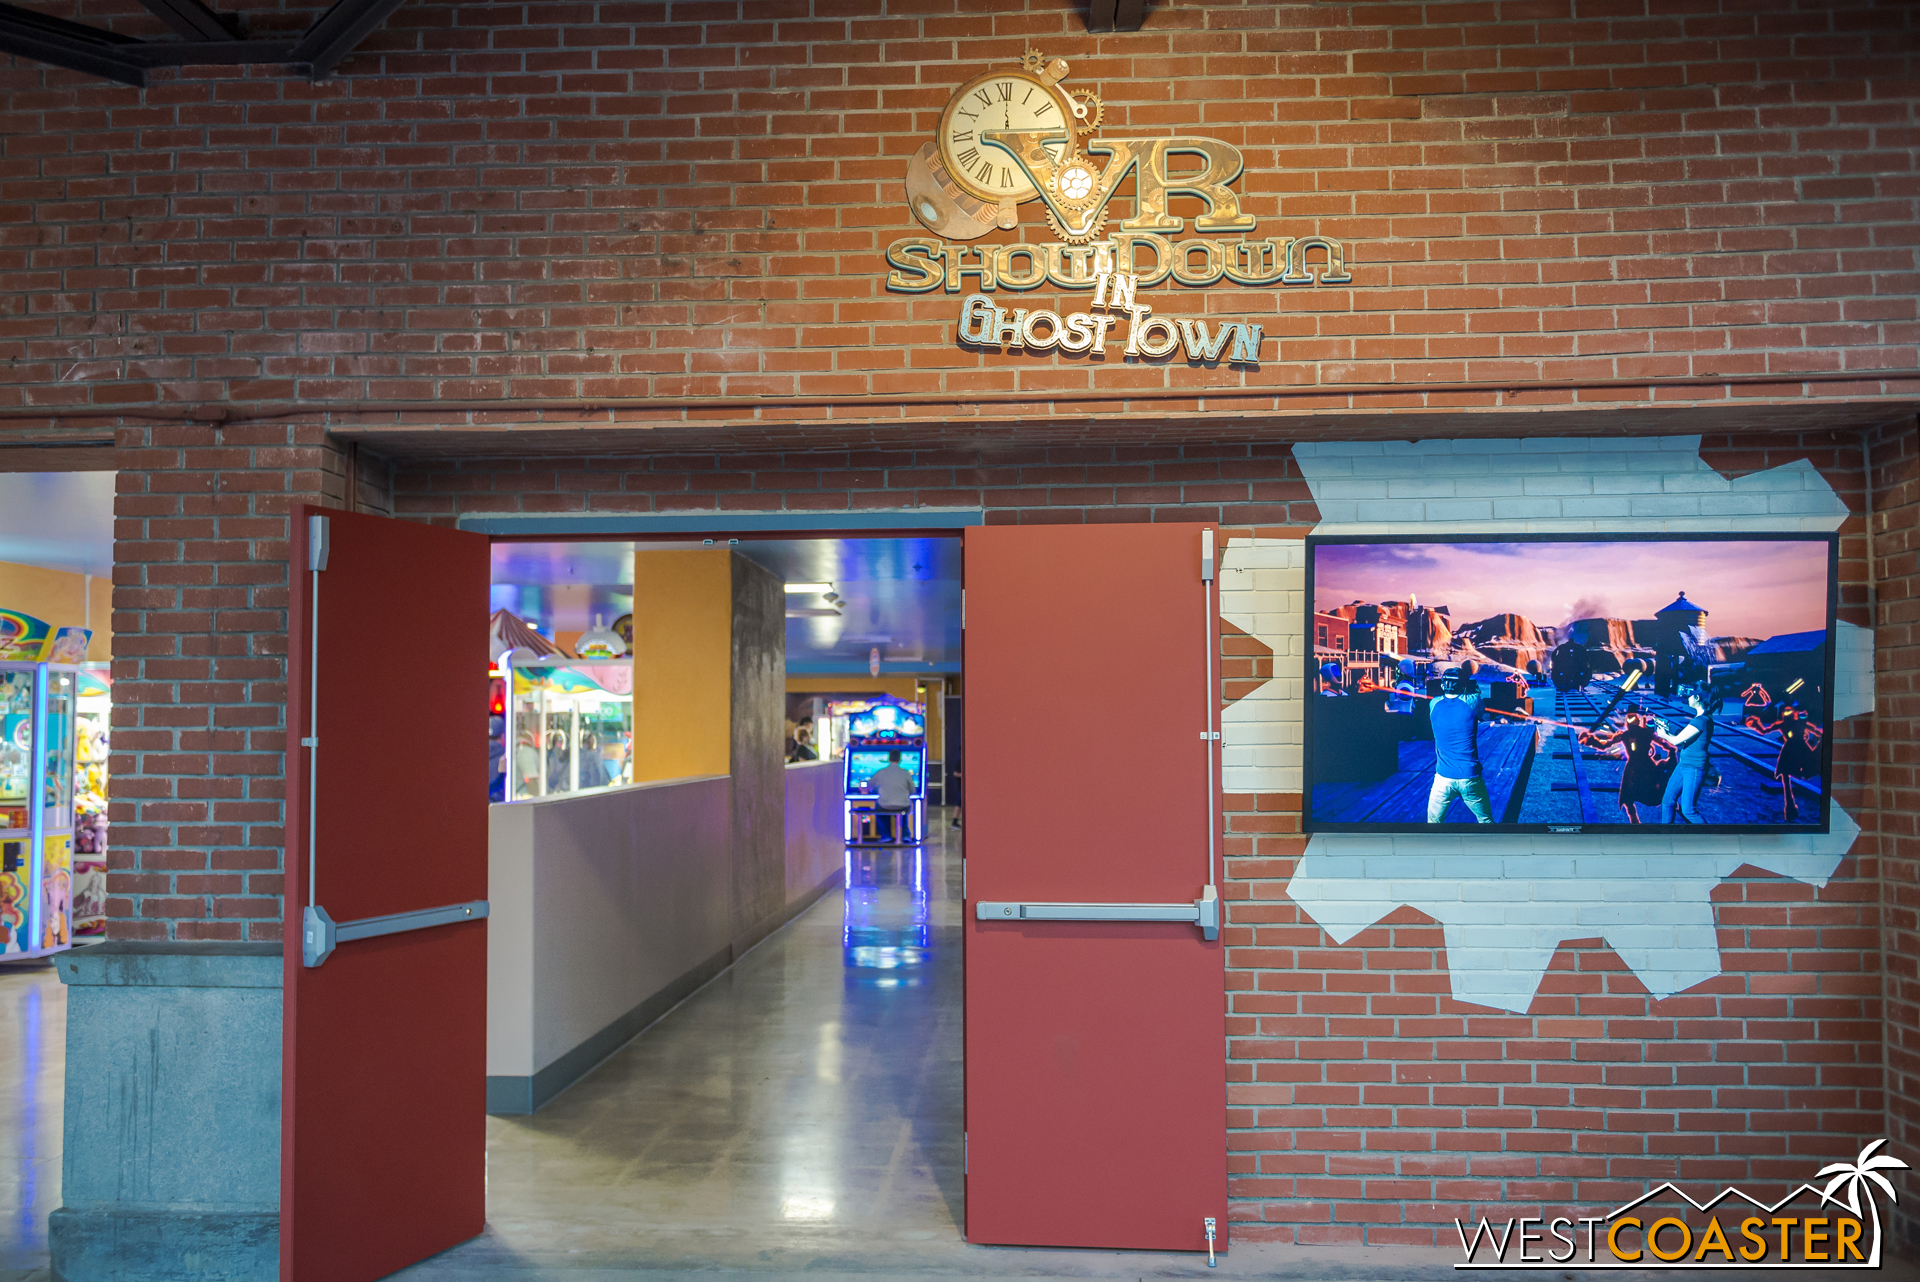  Over in the Boardwalk arcade area, under Voyage to the Iron Reef, the new VR upcharge has opened. 